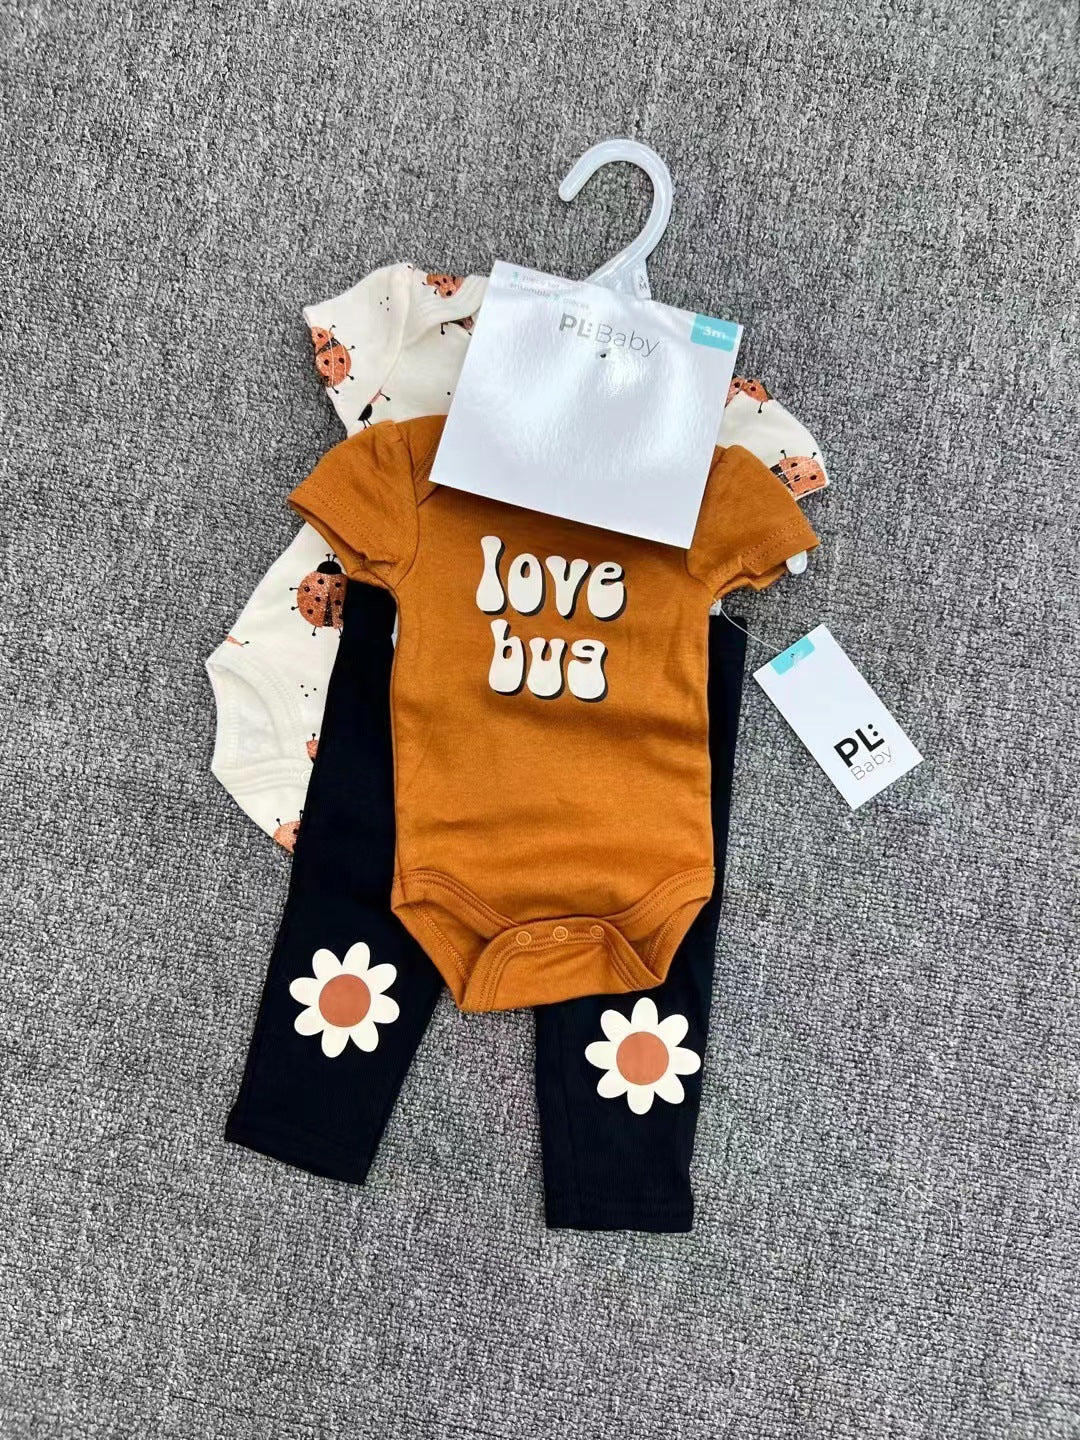 Cotton Short-sleeved New born Romper Three-piece Set 0-1 Year Old Baby Girl